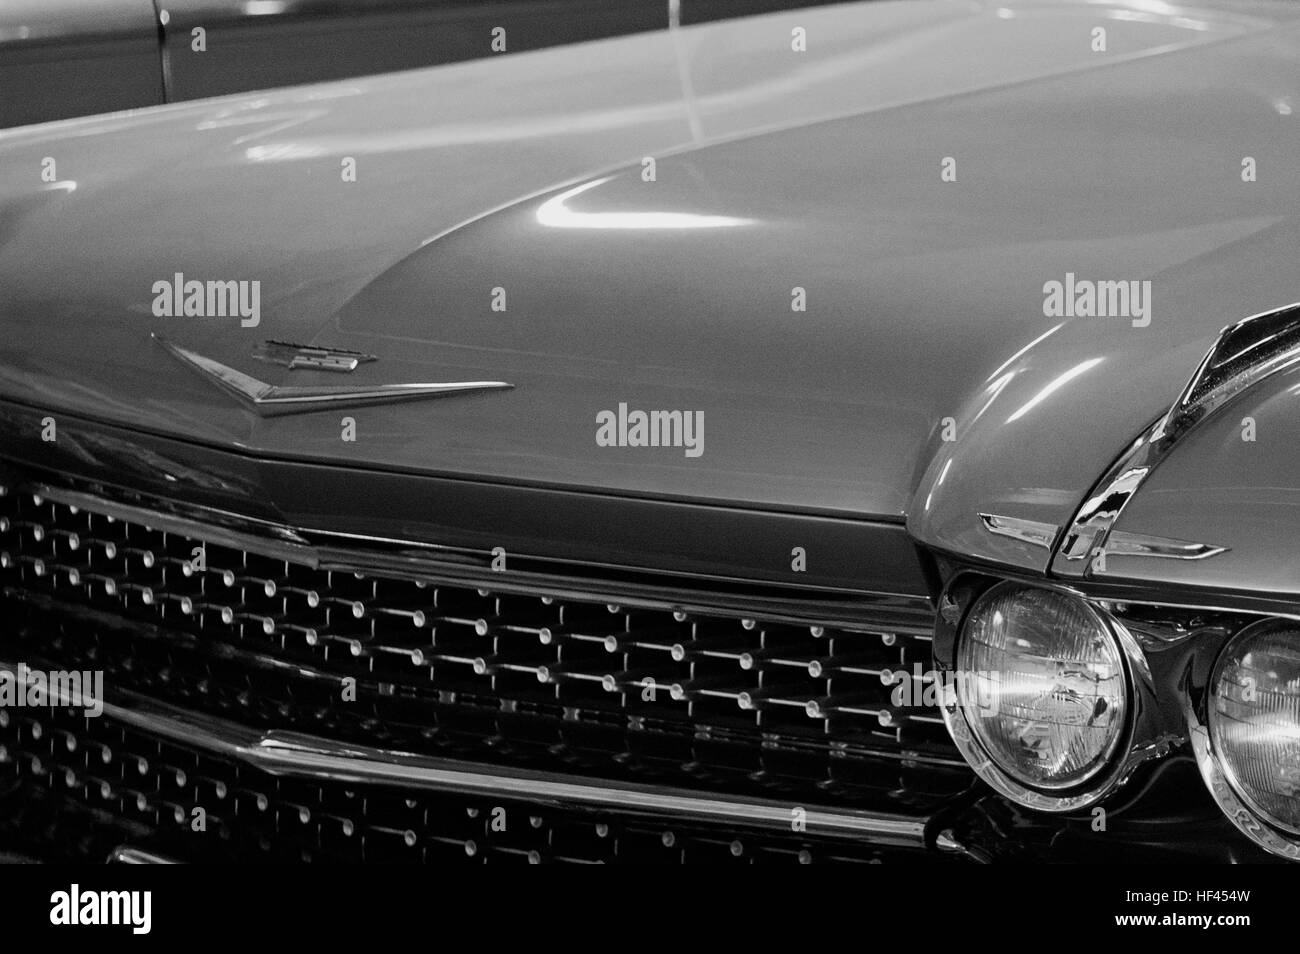 Photo Cadillac Coupe De Ville, Year 1959, 2-door  coupe, radiator grille, sign, symbol, emblem, Stock Photo